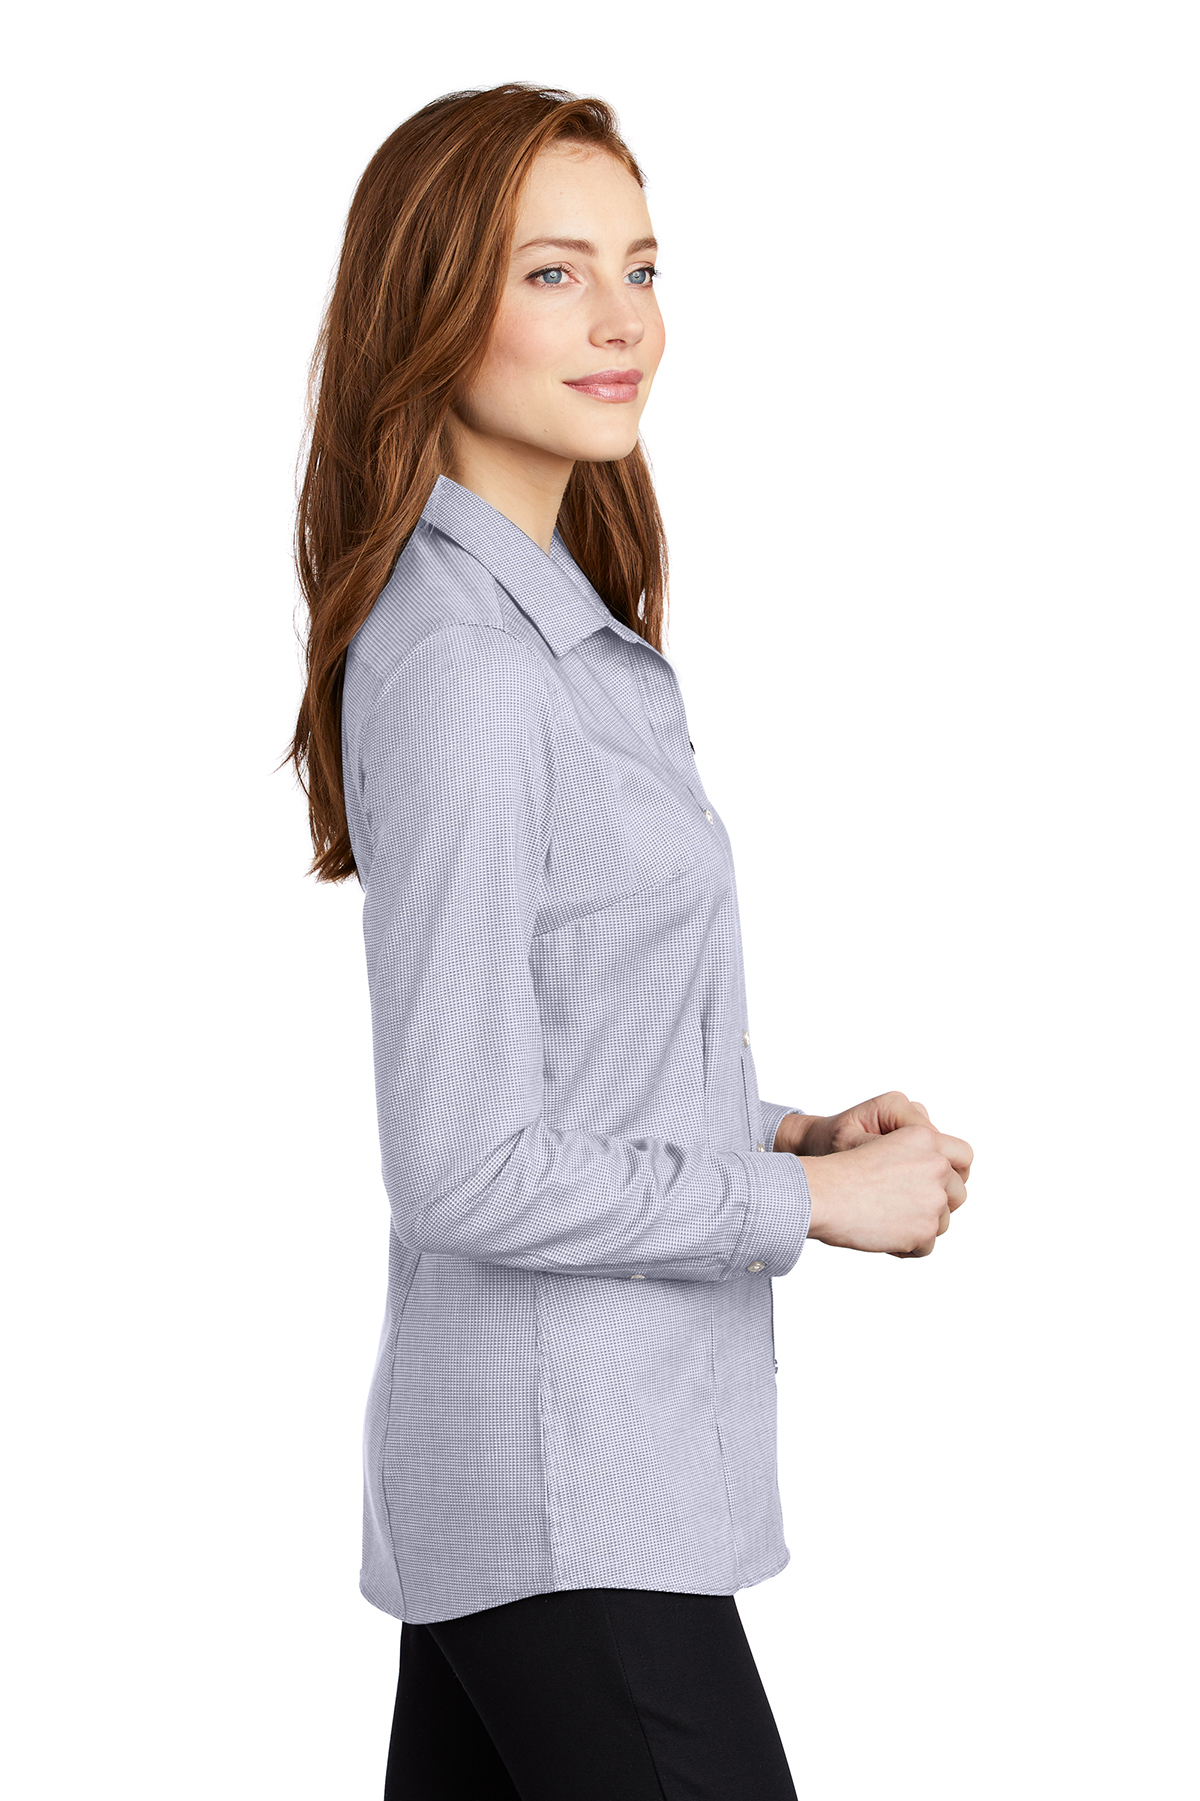 Authority Easy Ladies | Pincheck Port Product Authority Shirt Care Port |